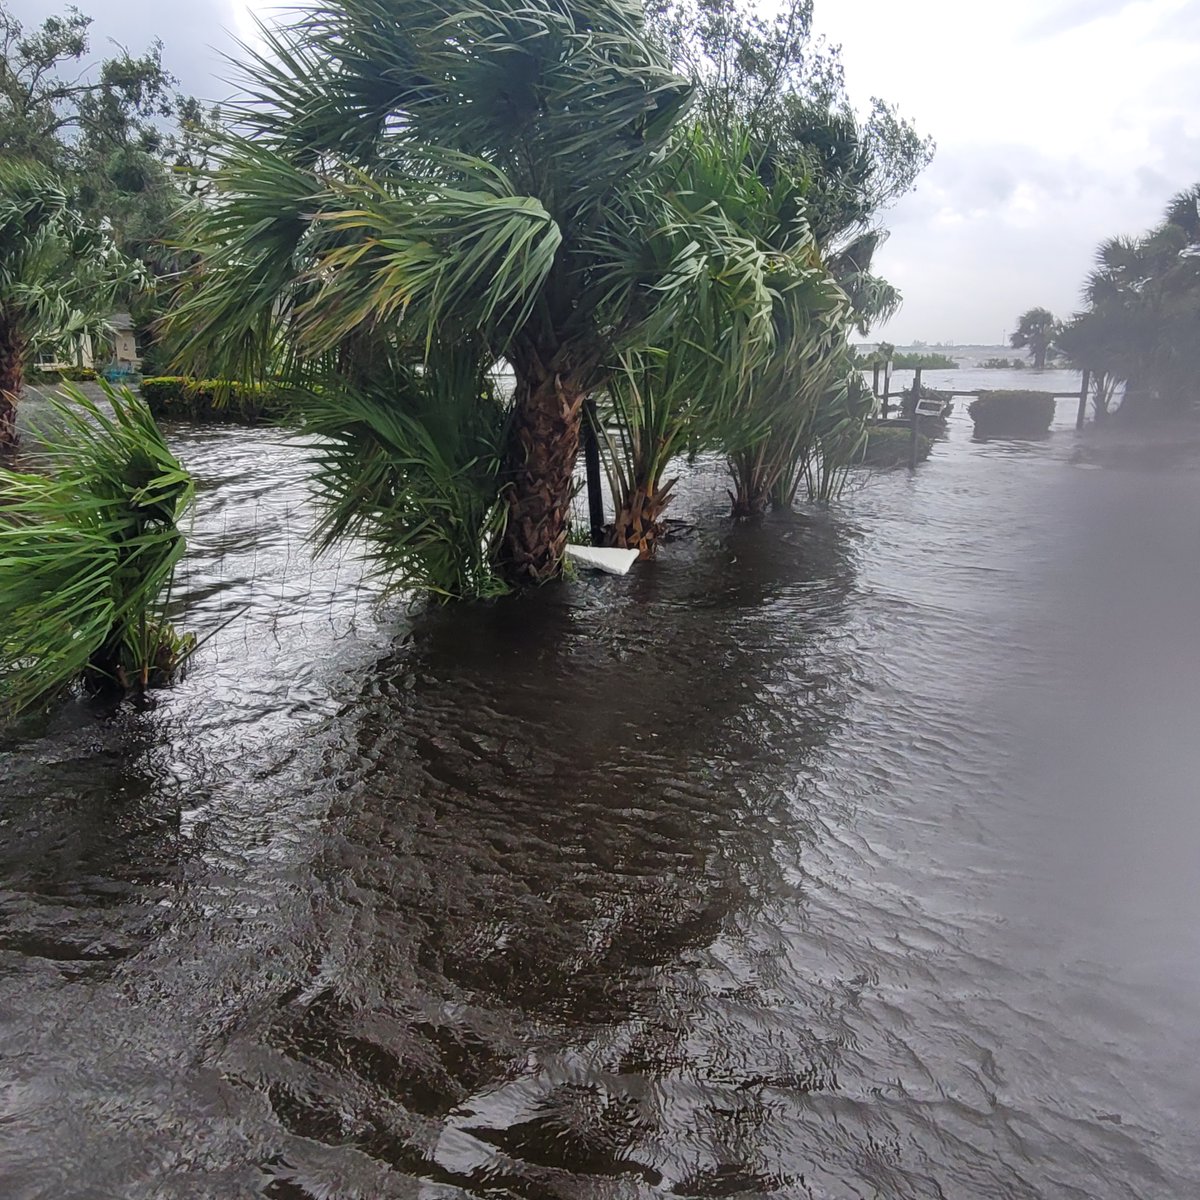 Pretty significant flooding in Charlotte Harbor this morning from the rising tide and 2-4 ft. of storm surge